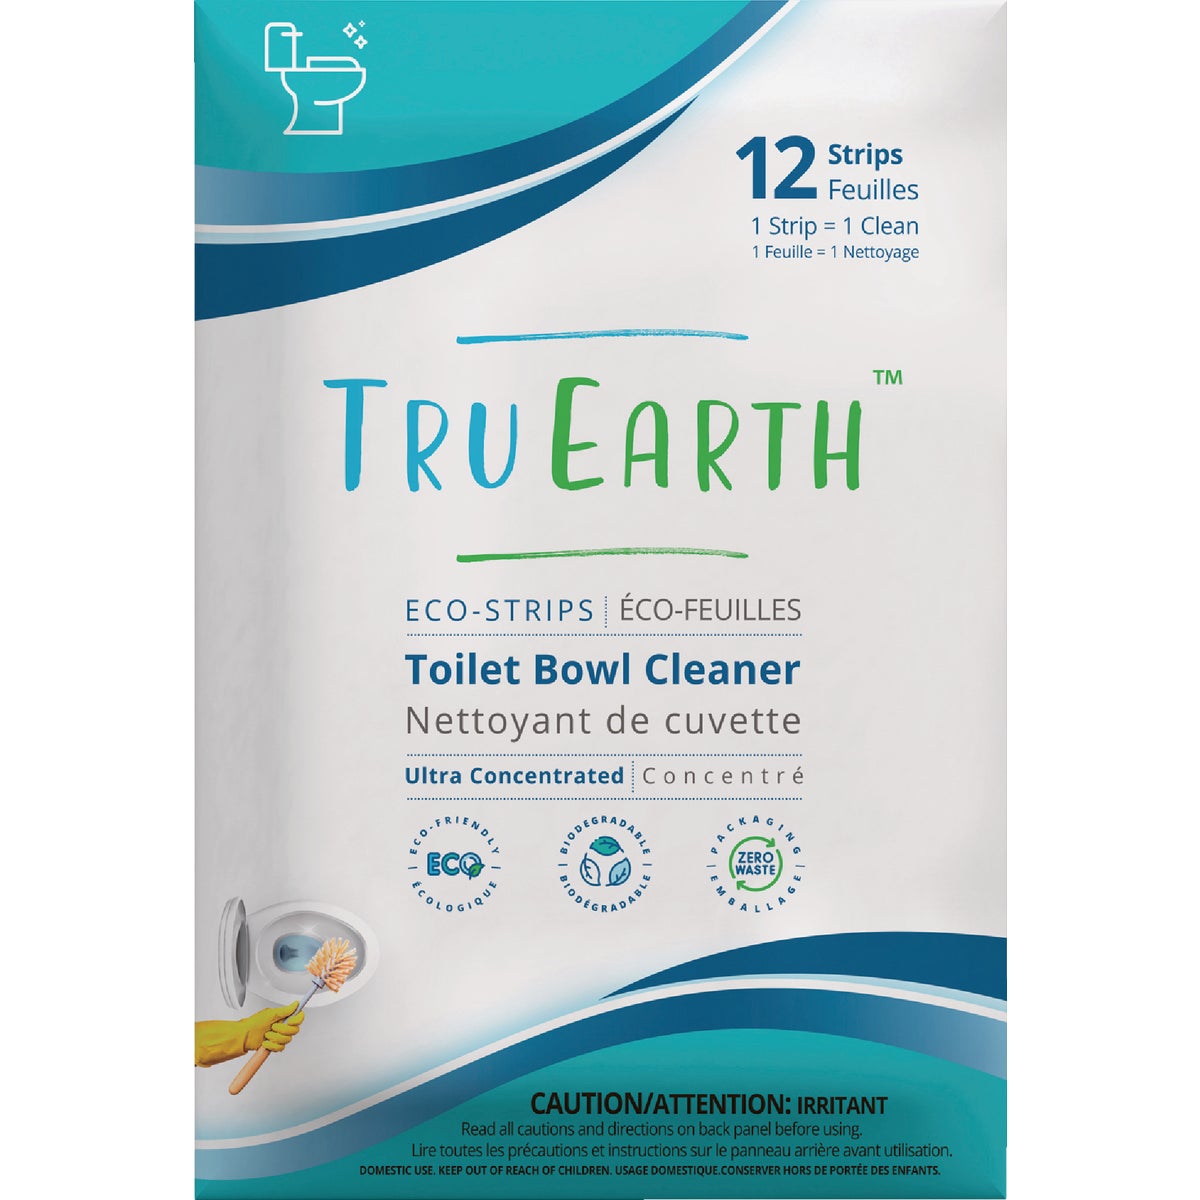 Tru Earth Toilet Bowl Cleaner Eco-Strips